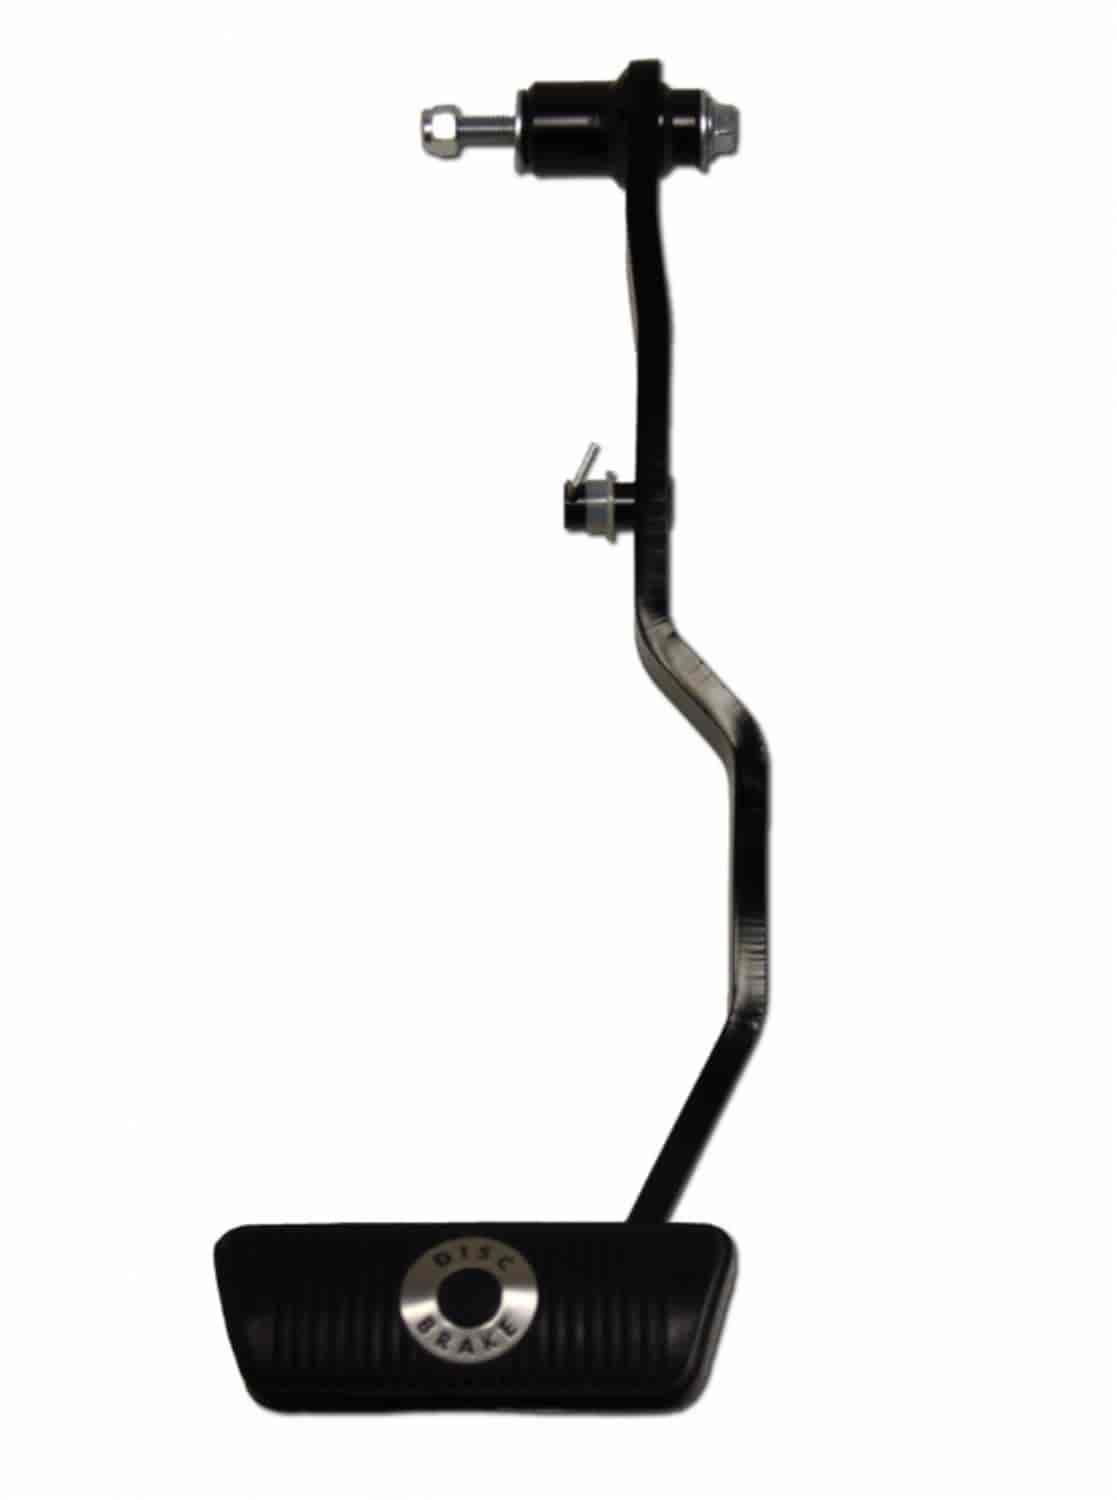 Brake Pedal Assembly for 1967-1970 Ford Mustang, Mercury Cougar [Power Brakes/Auto Transmission]